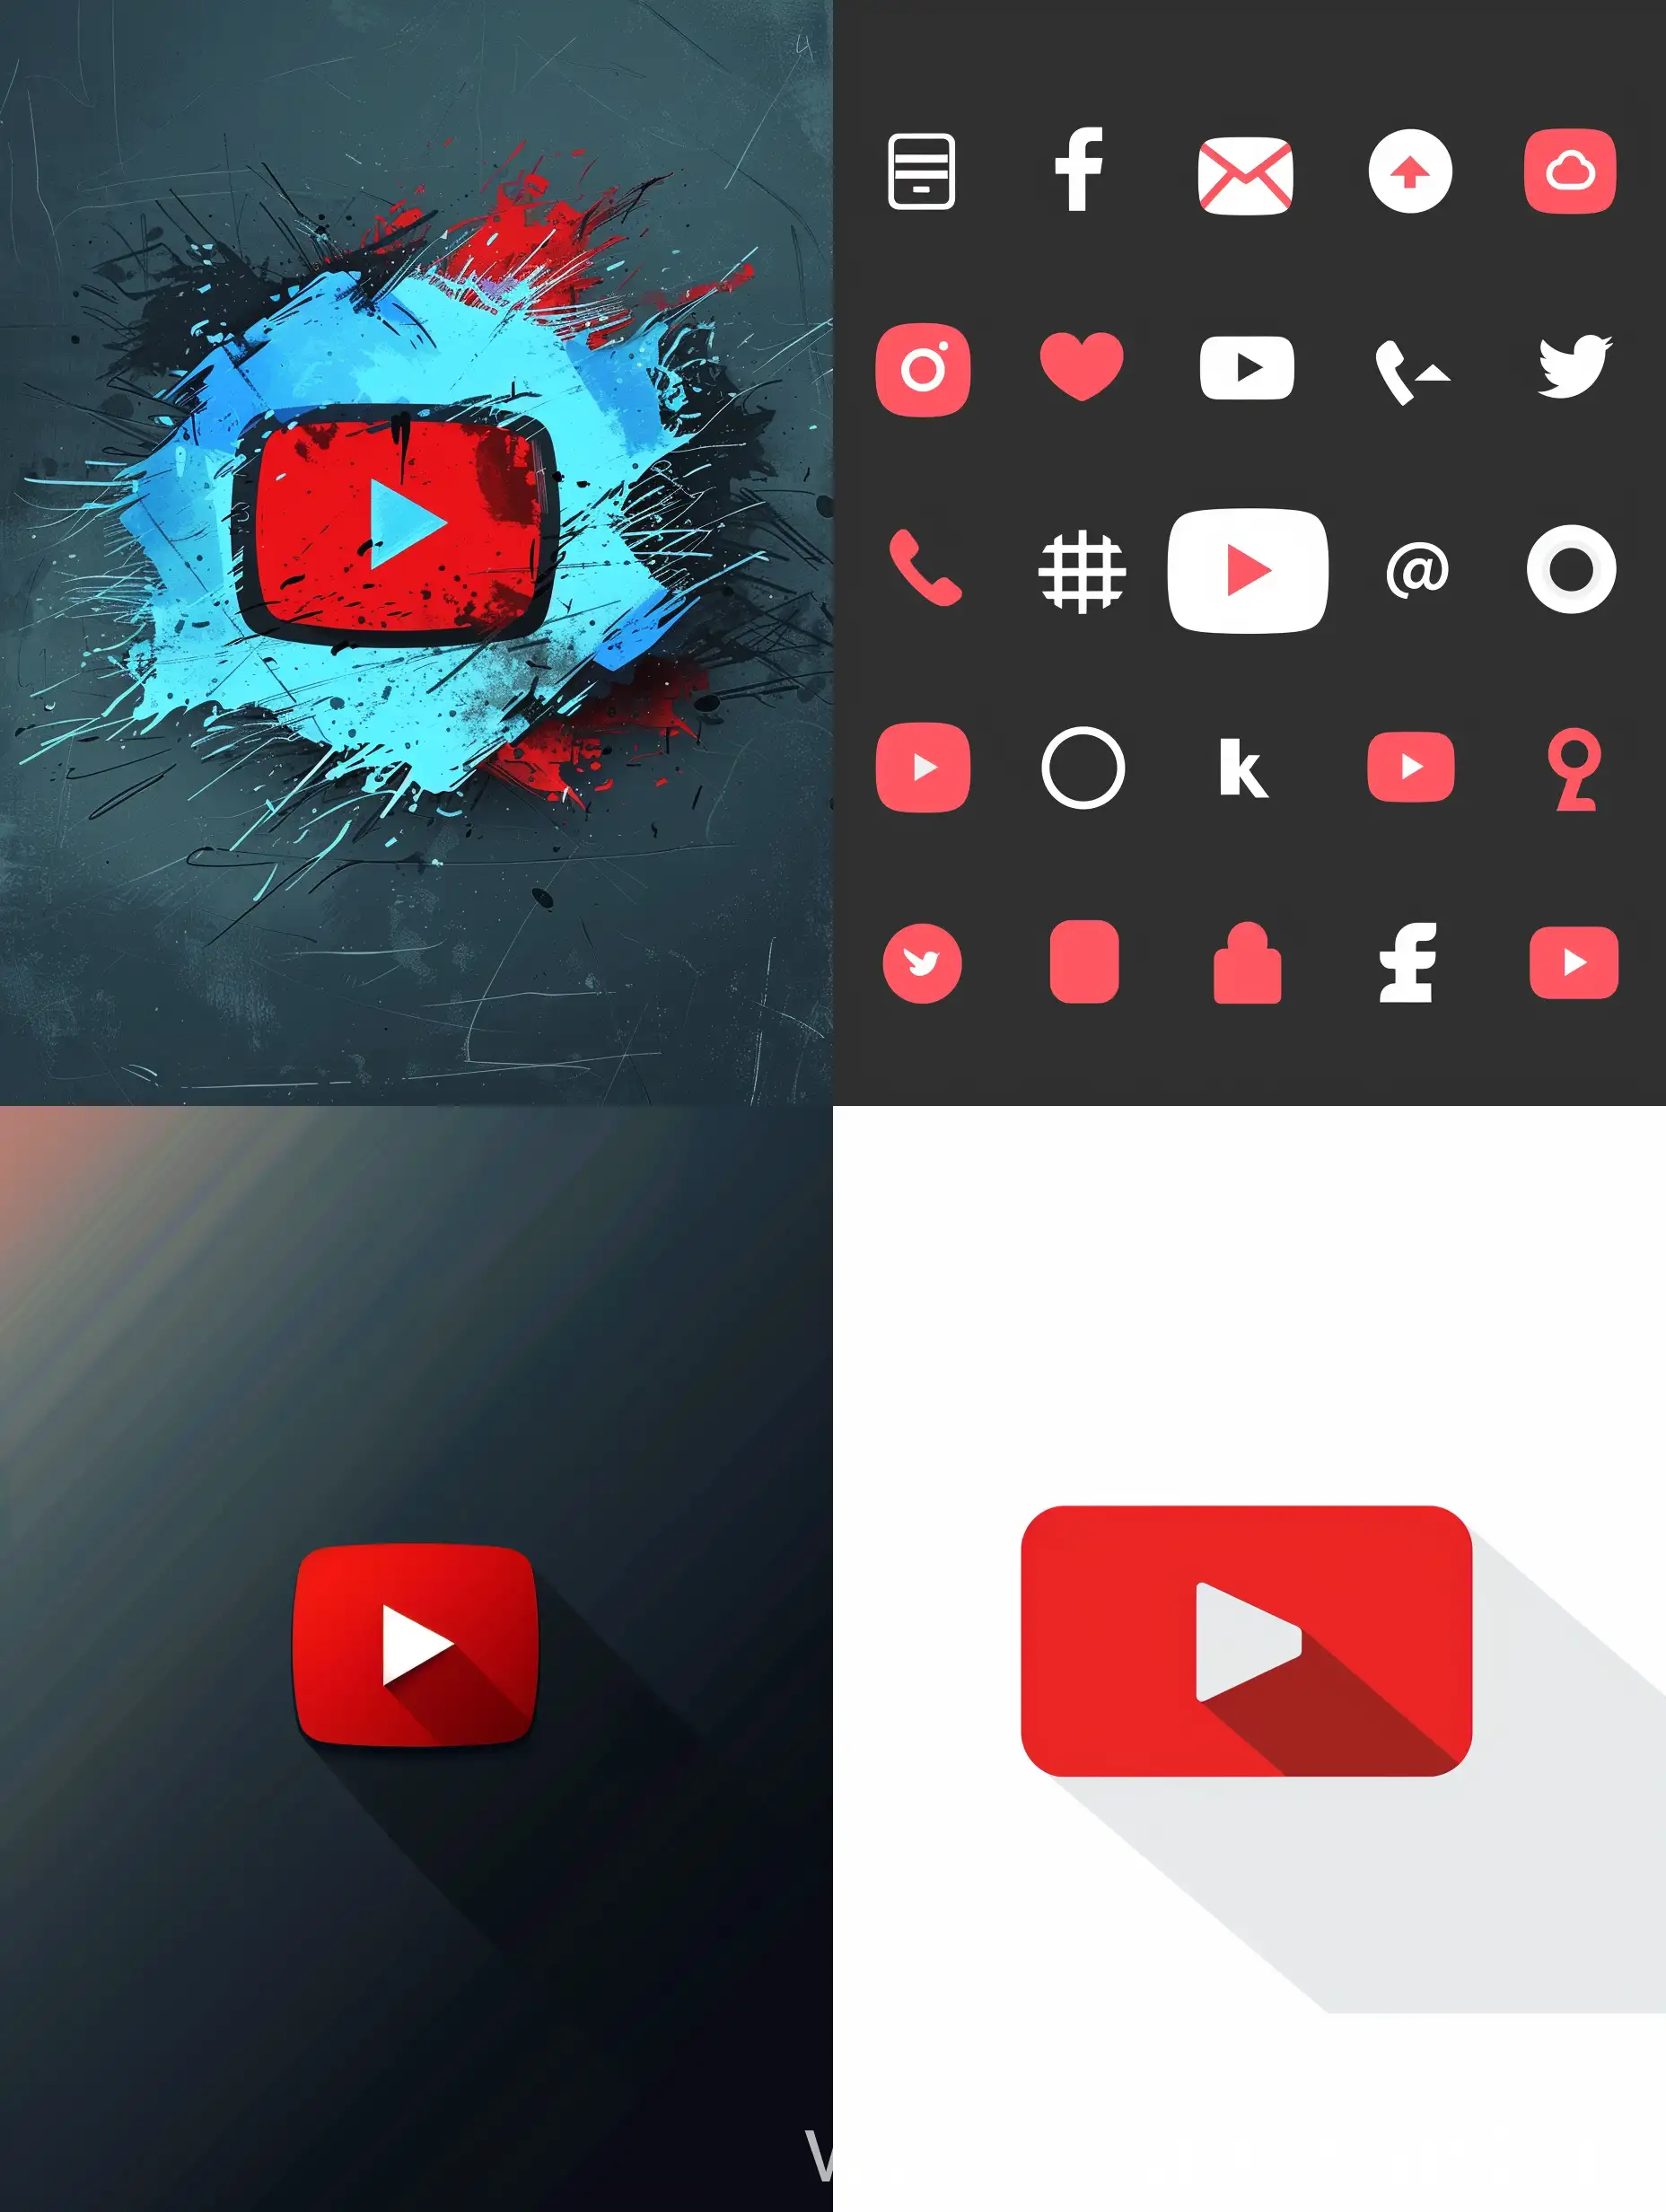 Make a proffesional youtube logo,with symbols 